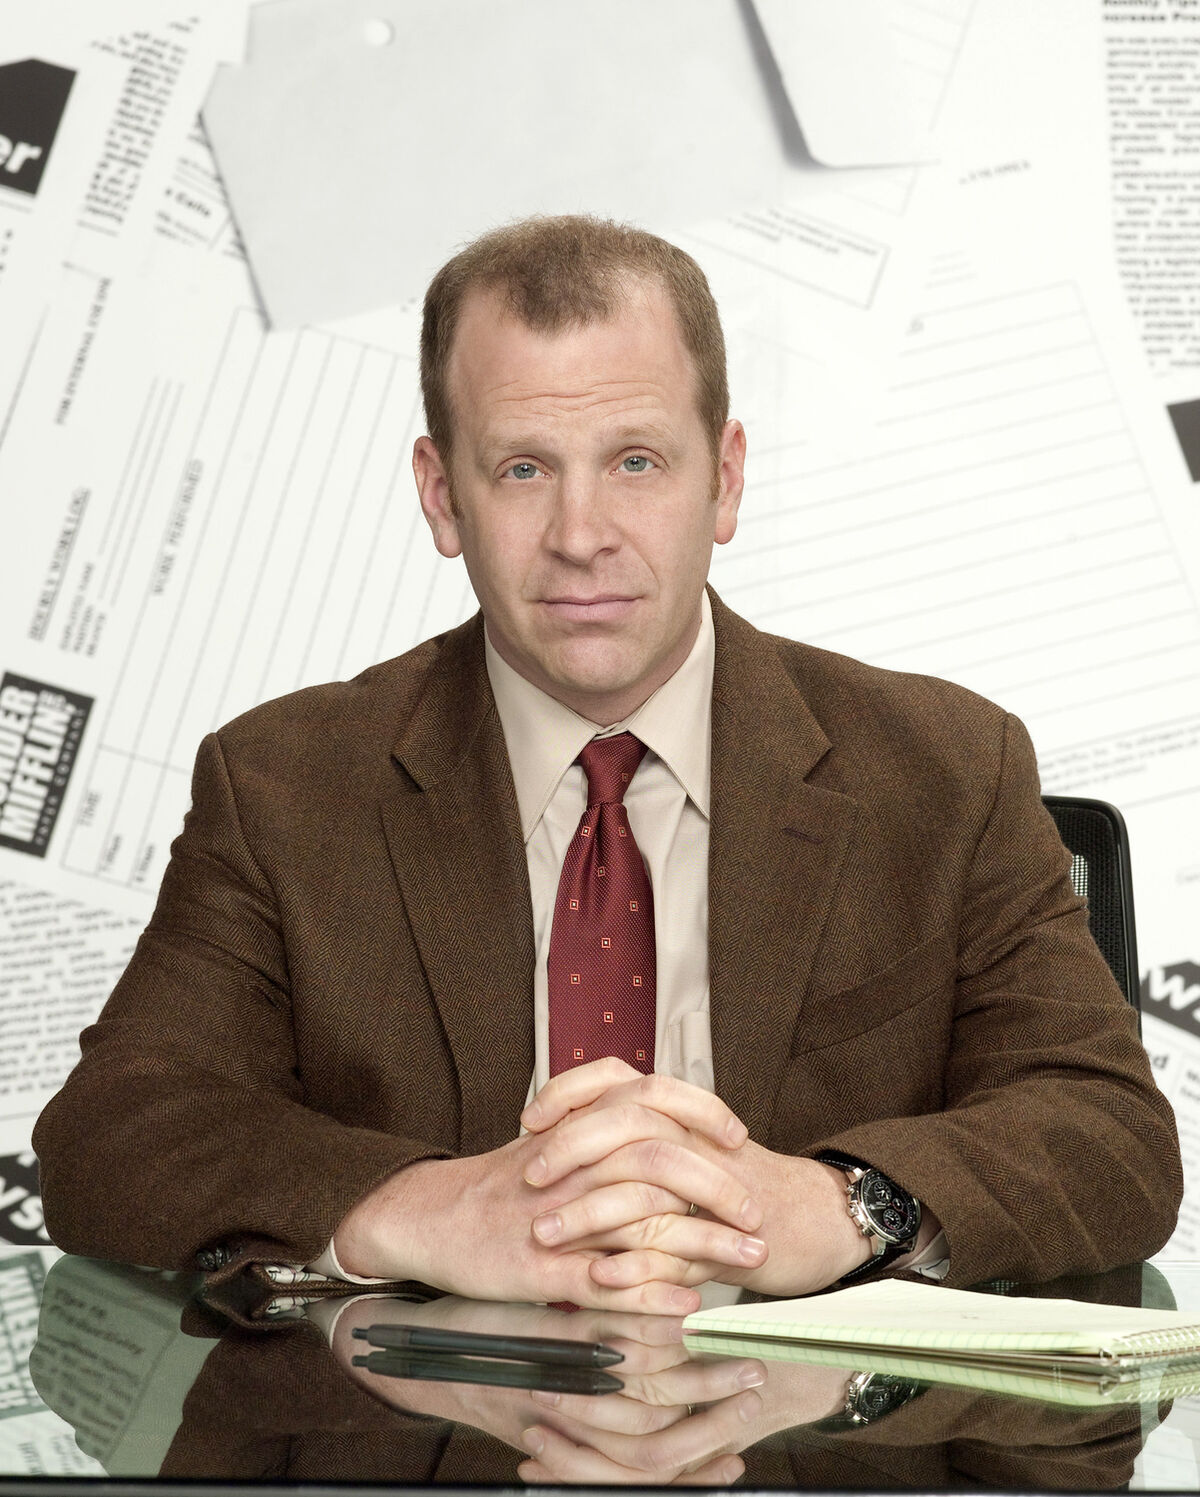 Paul Lieberstein from 'The Office' on what made Toby so funny